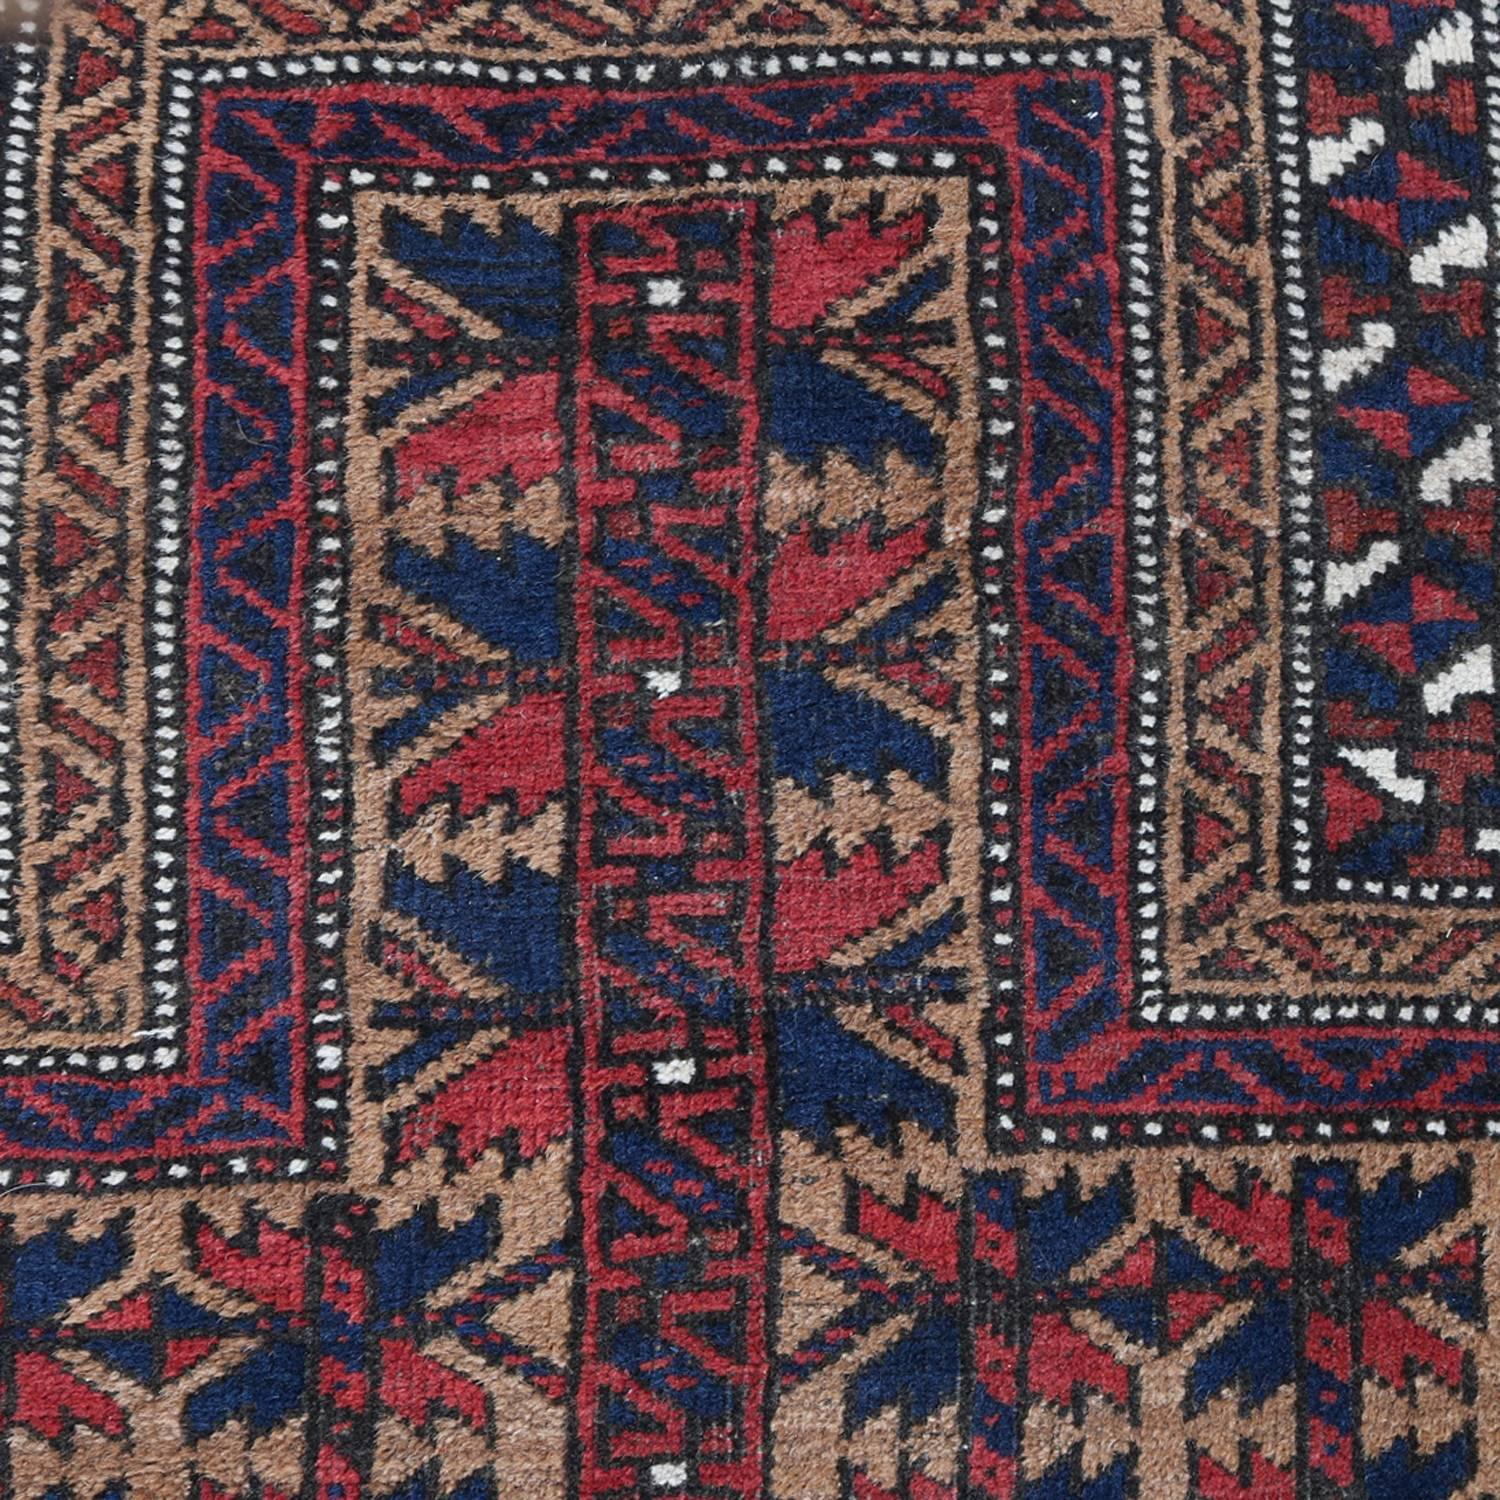 Antique hand-knotted Persian Baluch oriental prayer rug features traditional repeating geometric design, dominating colors include reds, blues, tans and ivory, 1900

Measures: 61